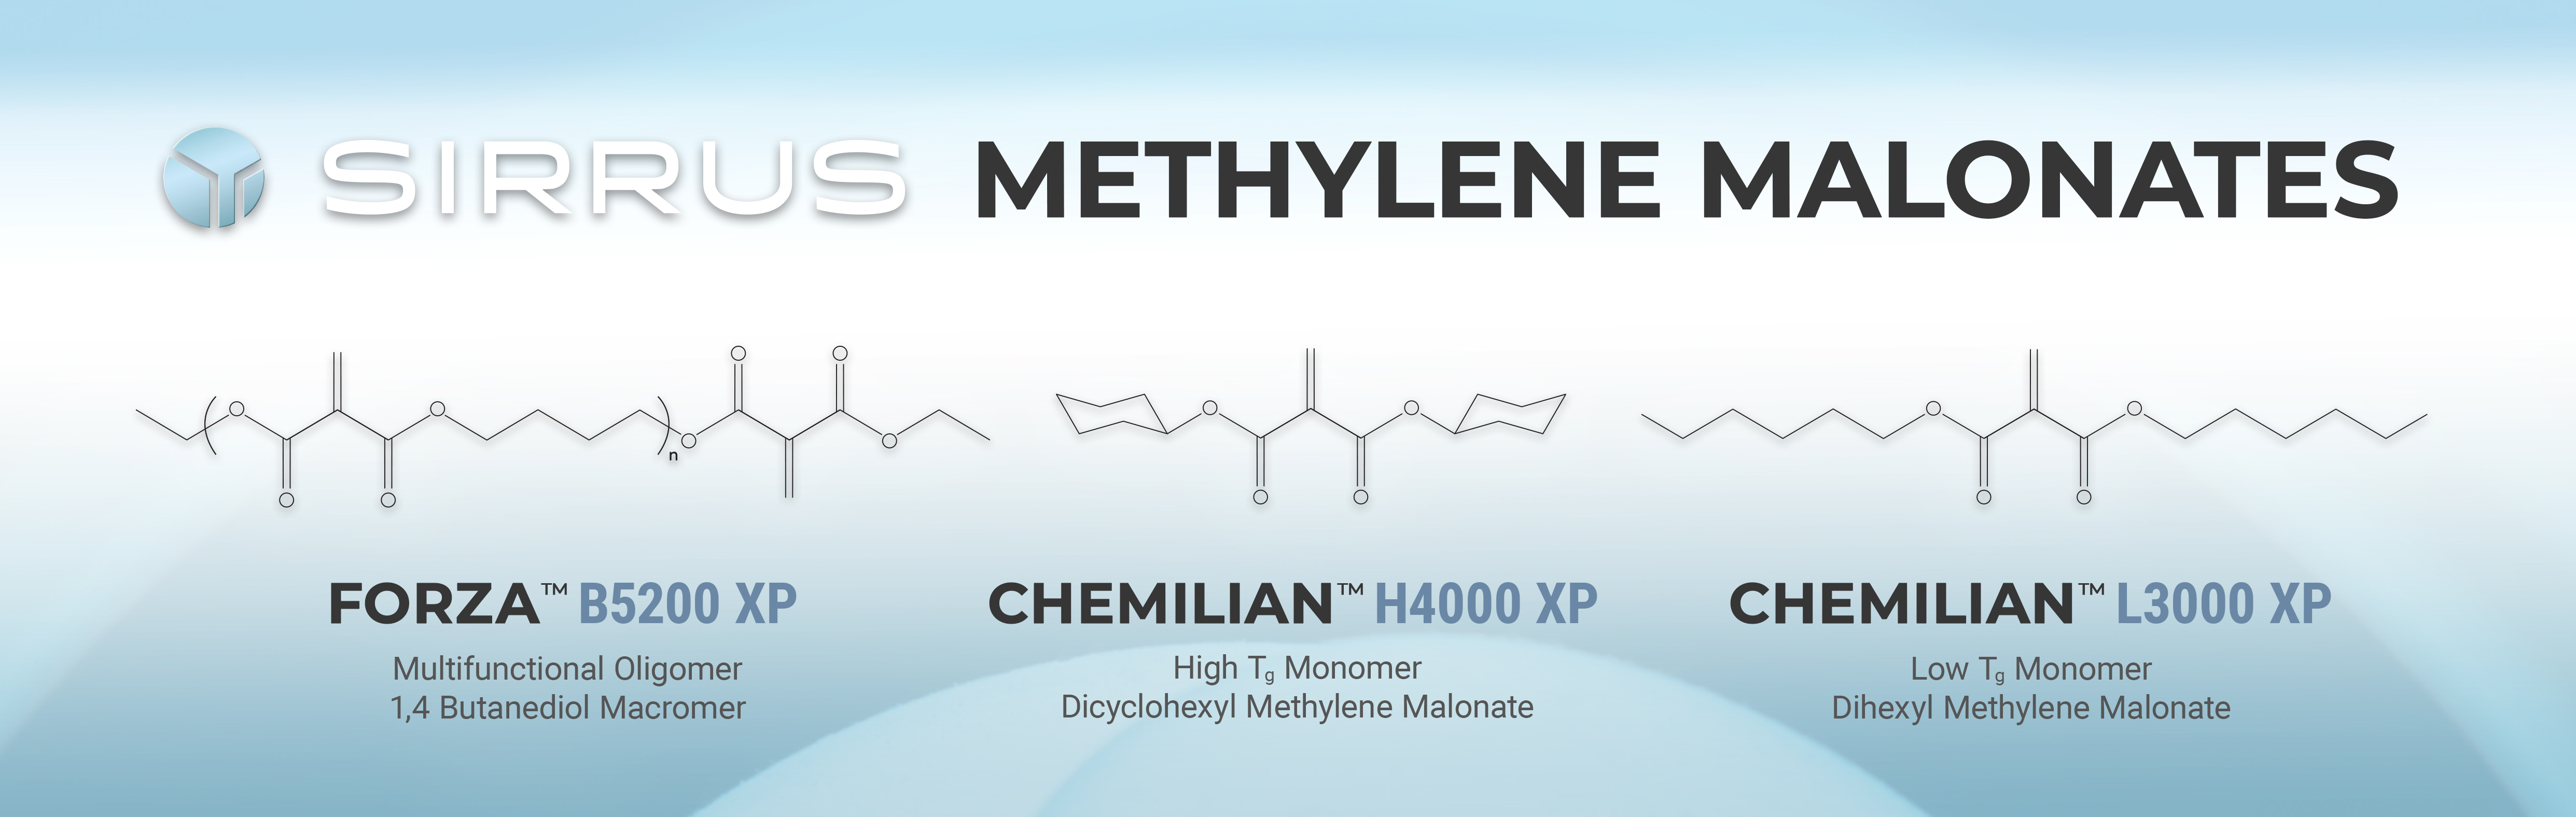 Methylene malonates are novel materials for UV cure offering low odor, color, viscosity and shrinkage. When combined with methacrylates, they have been shown to accelerate and improve cure speed and performance. Methylene malonates, combined with electron-rich compounds, can be cured to make new alternating copolymers that deliver unique performance attributes.